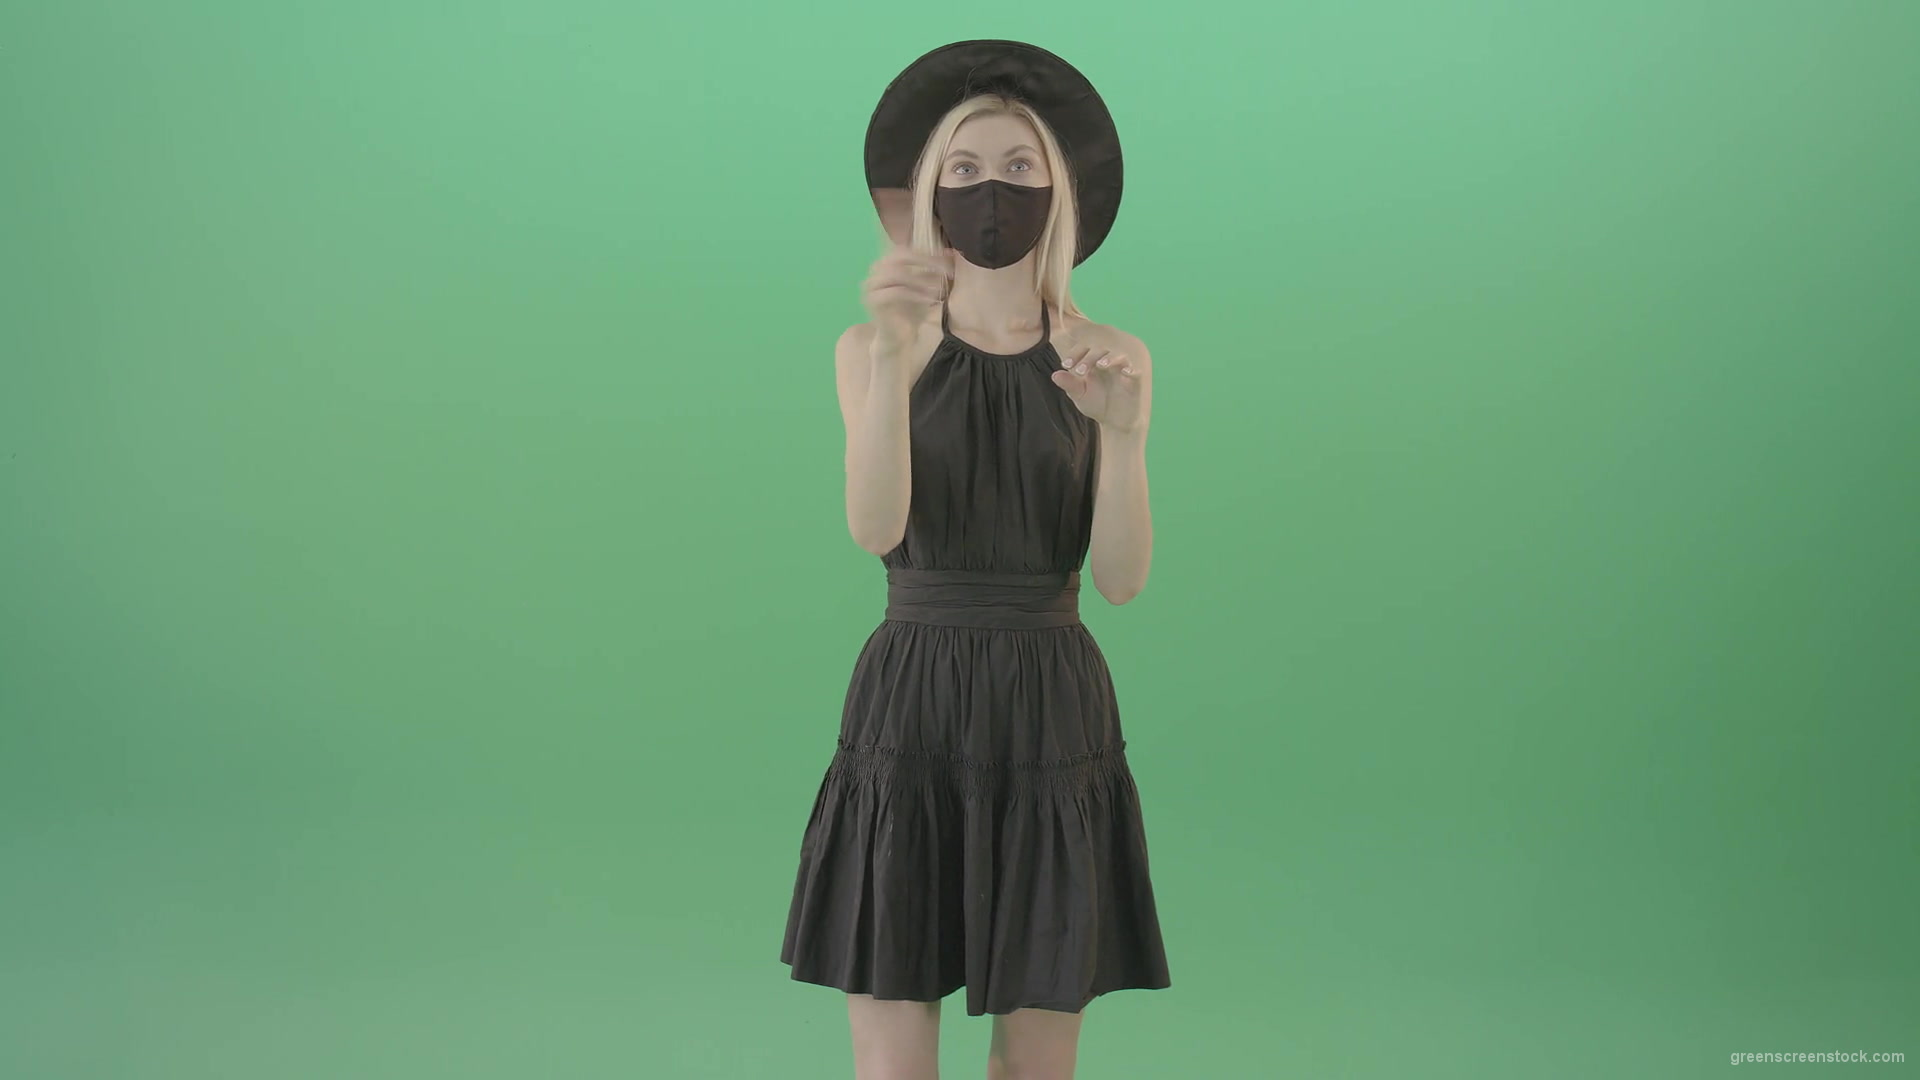 Covid-19-girl-in-black-mask-working-on-virtual-keyboard-buttons-and-touch-screen-on-green-background-4K-Video-Footage-1920_007 Green Screen Stock